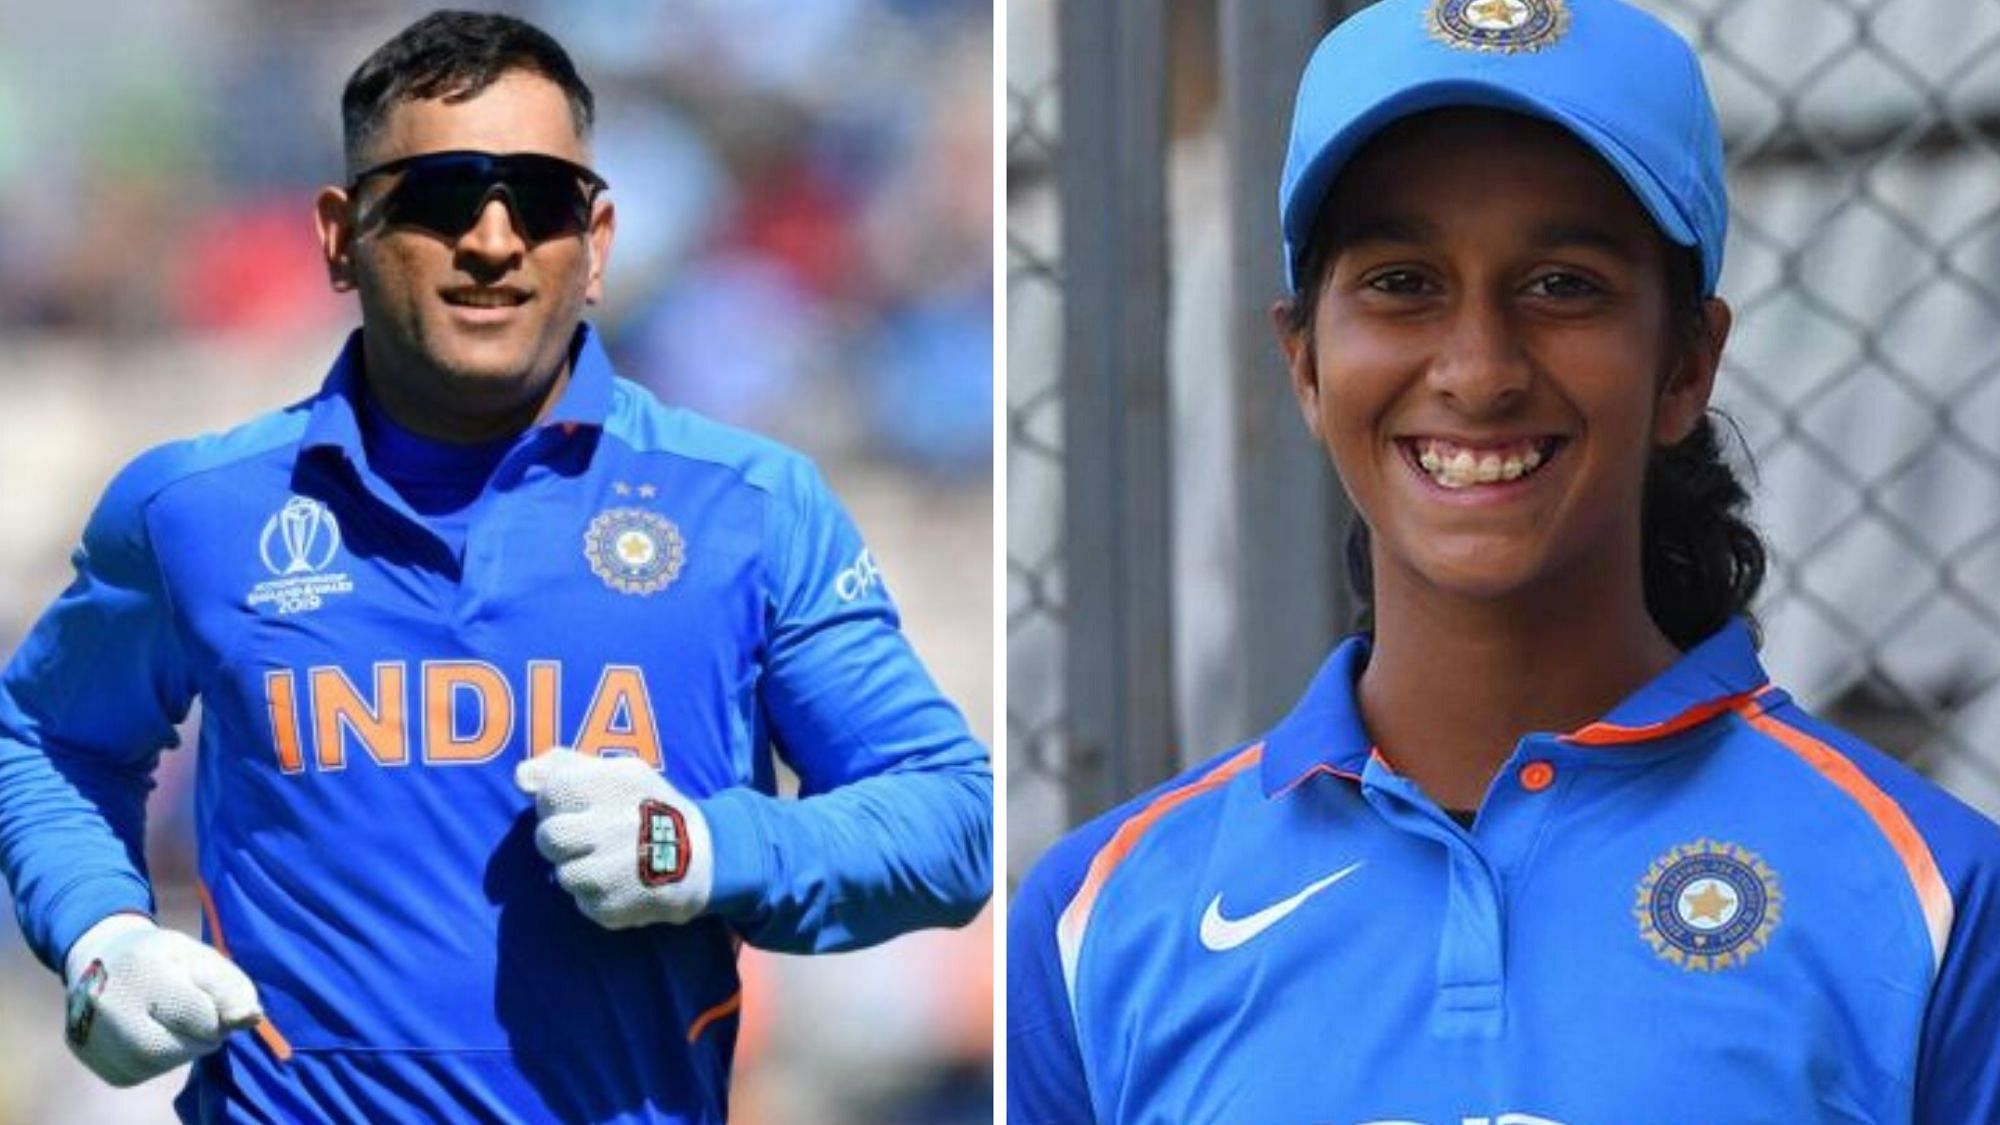 During a live chat session, Jeminah picked Dhoni when she was asked to name one male captain she would like to play under.